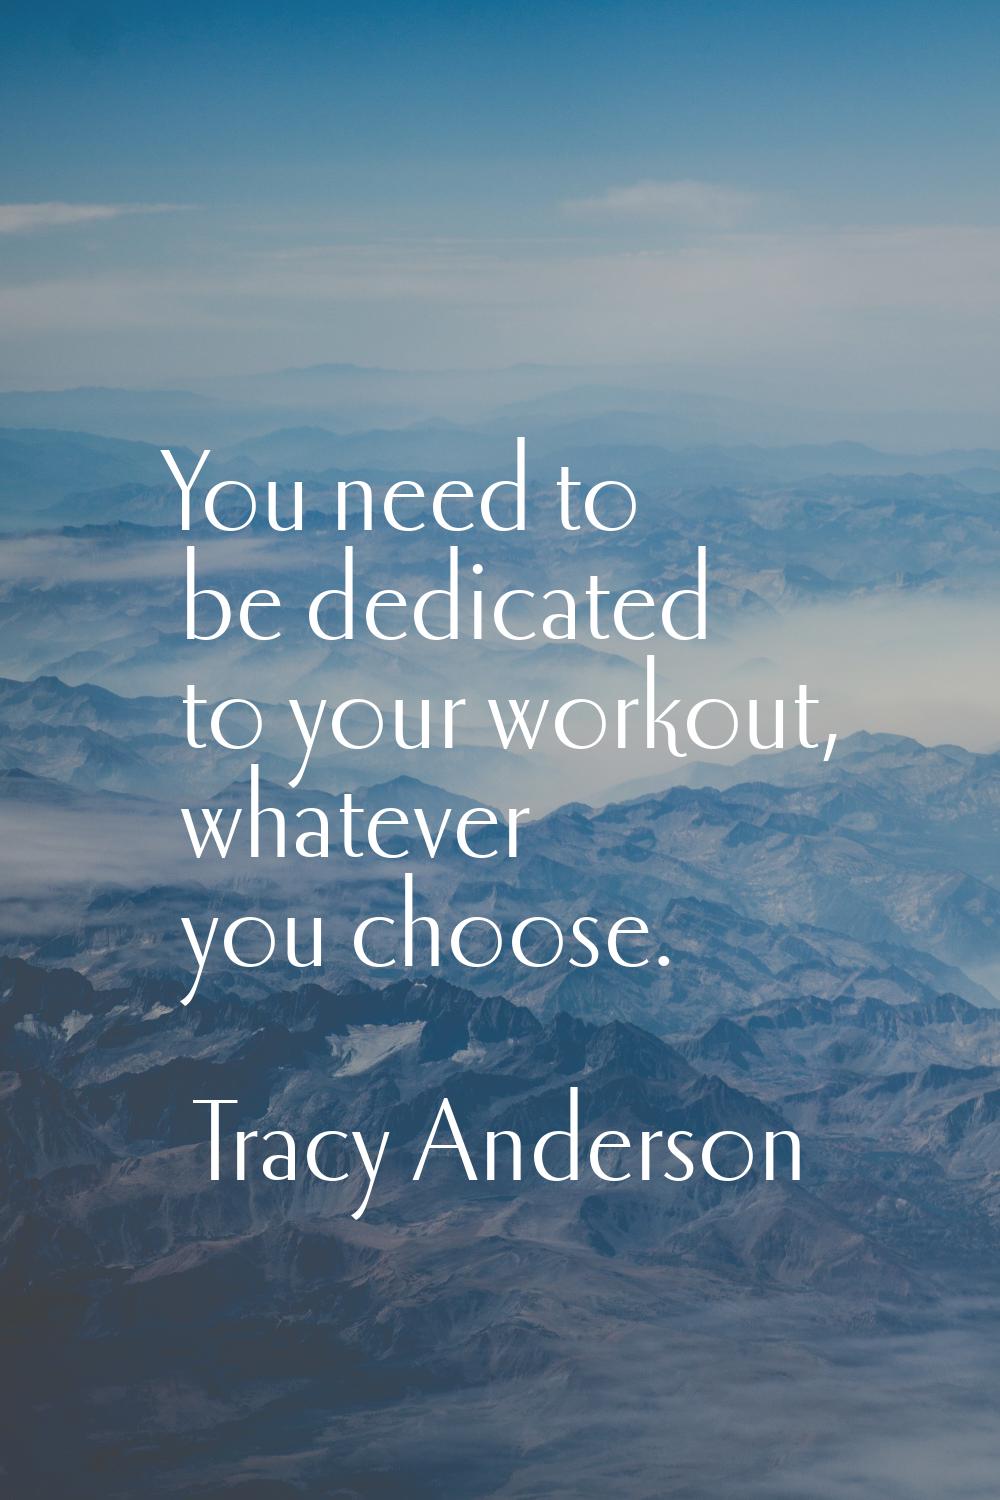 You need to be dedicated to your workout, whatever you choose.